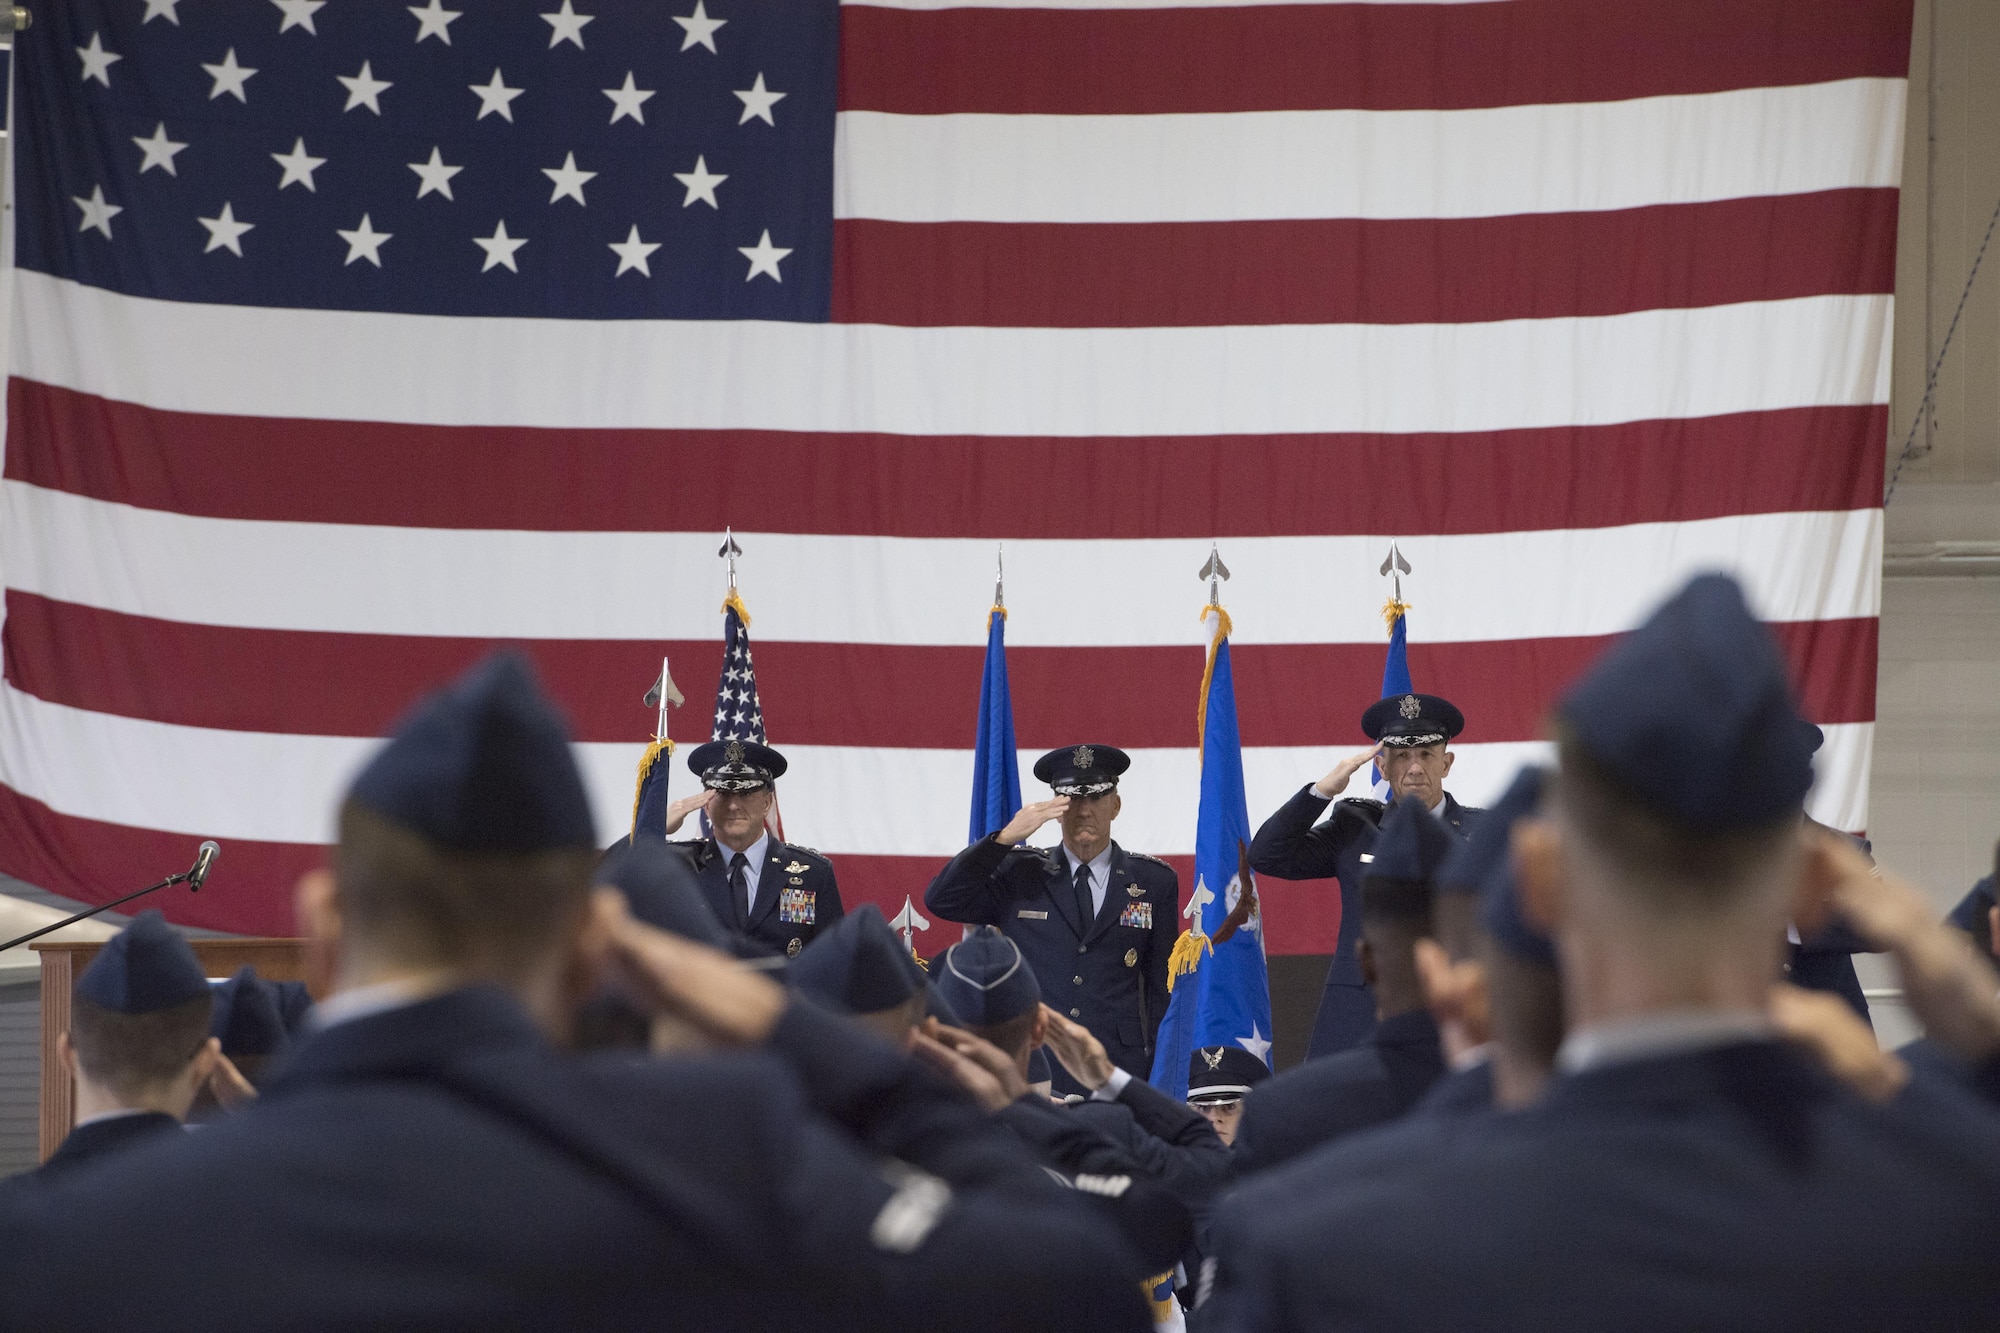 U.S. Air Force Chief of Staff Gen. David L. Goldfein, General Hawk Carlisle, former commander, Air Combat Command, and Gen. James M. Holmes, Commander, ACC, salute during ACC’s Change of Command ceremony at Joint Base Langley-Eustis, Va., March 10, 2017. Holmes assumed command from Carlisle, who retired after 39 years of service to the Air Force. (U.S. Air Force photo by Staff Sgt. Nick Wilson)